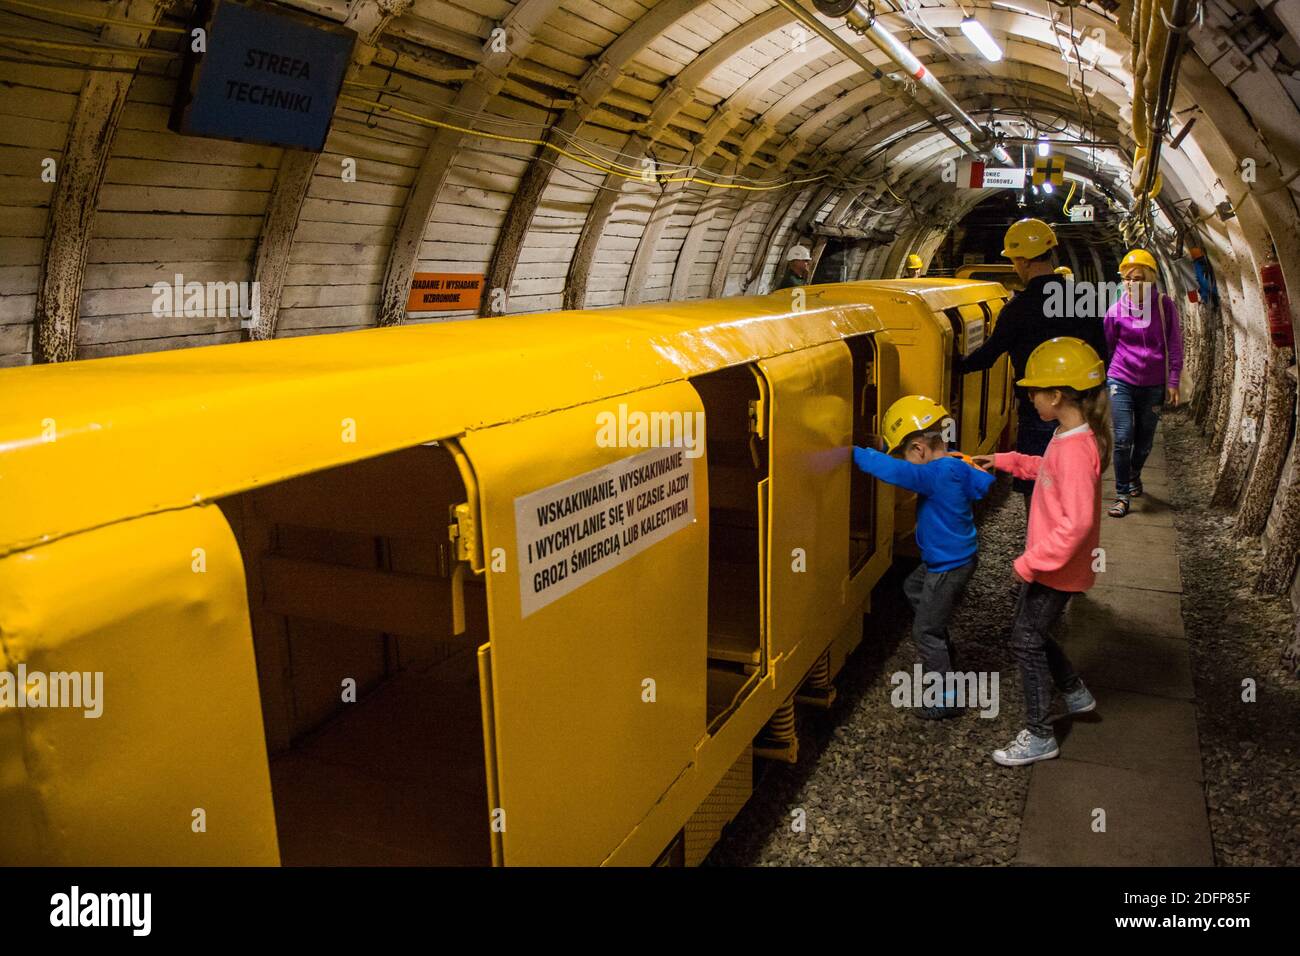 Ruda Śląska, Poland - July 16, 2017: Yellow wagons carry tourists in a tunnel at the coal mine. Stock Photo